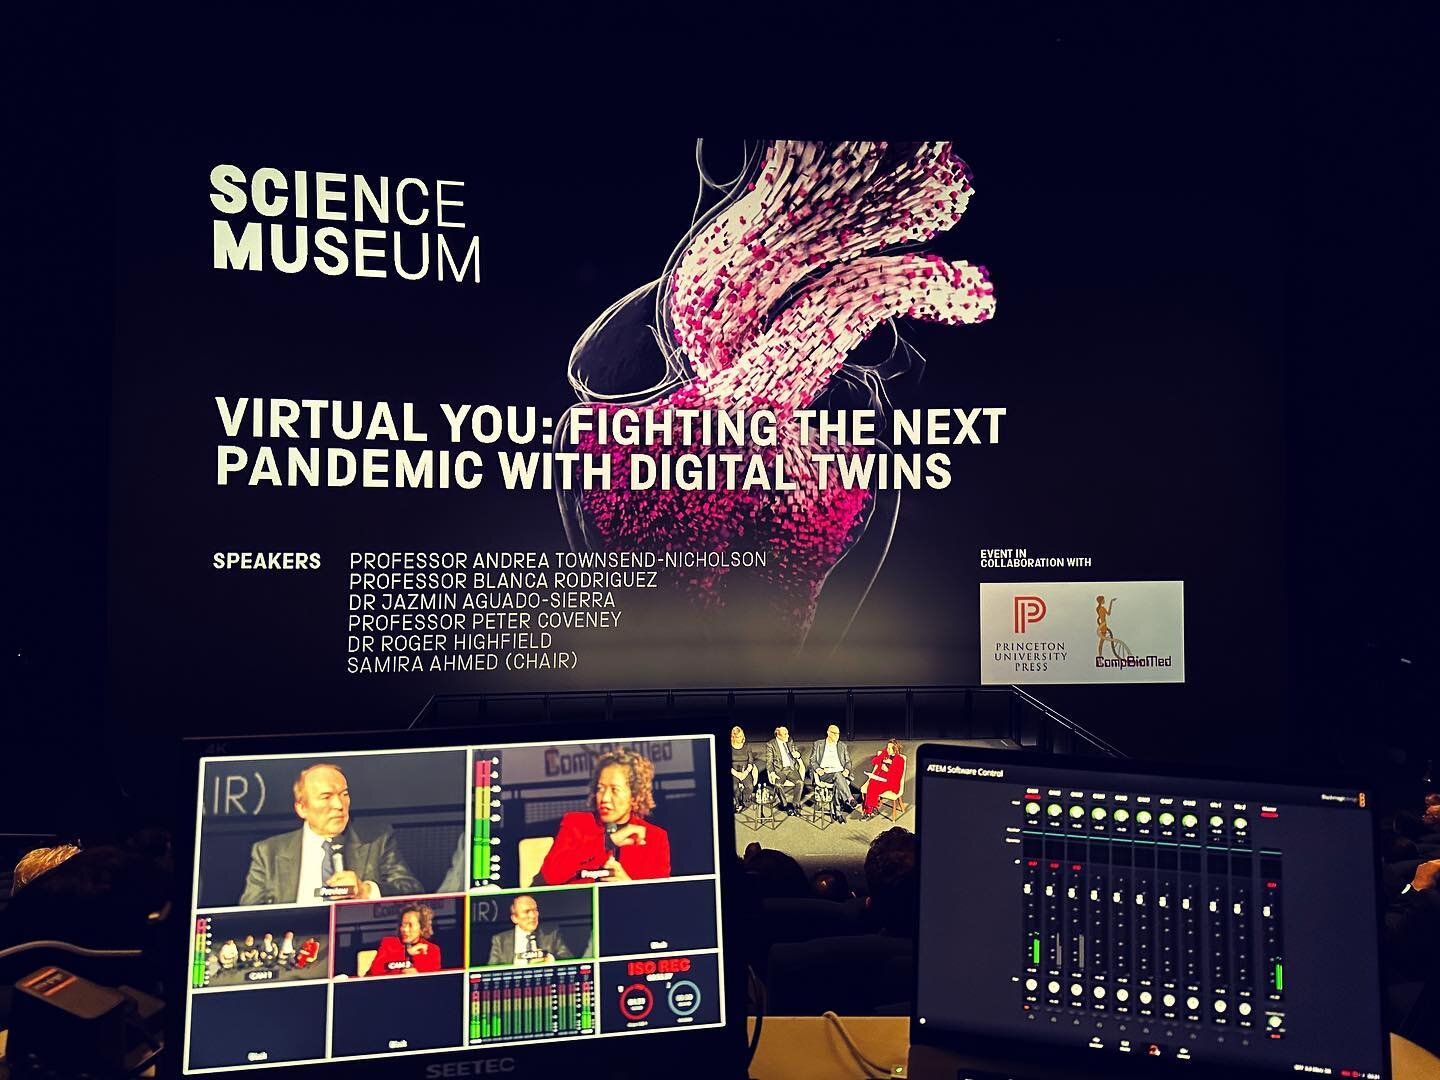 #multicam event shoot with a quick turnaround to be posted on YouTube for an interesting talk on the prospect of &ldquo;digital twins&rdquo; at @the.science.museum for @princetonupress last night. 

#eventfilming #multicamproduction #liveevents #scie